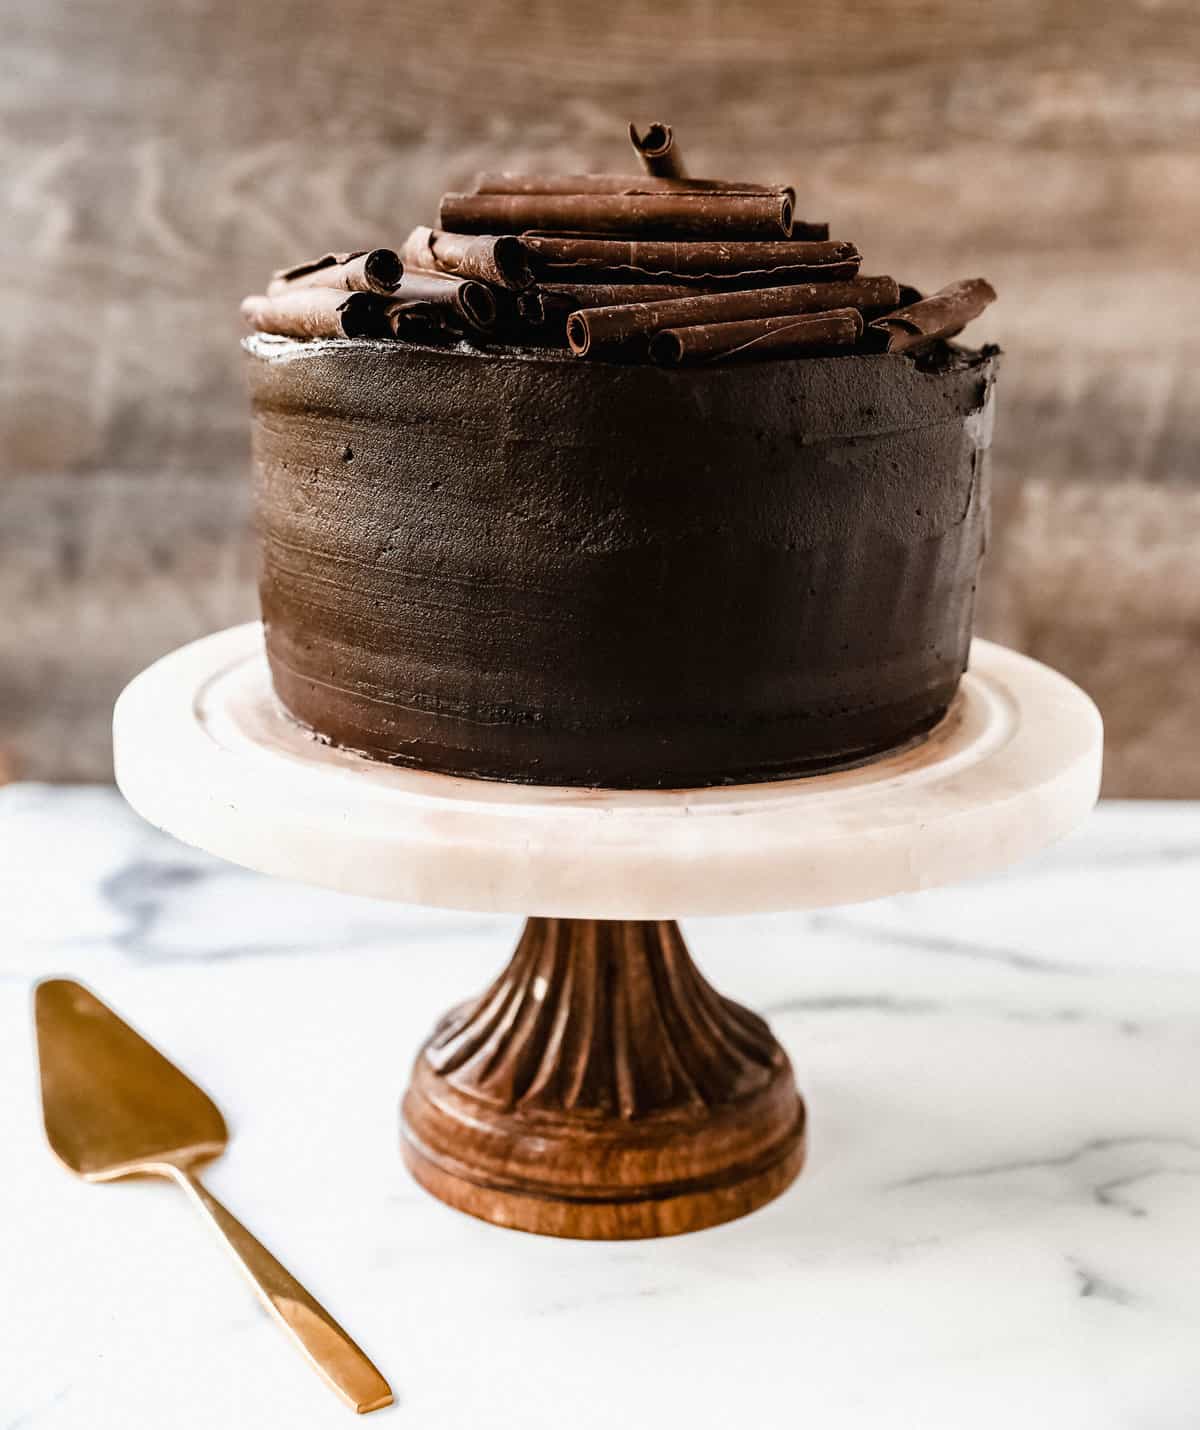 The Best Chocolate Cake Recipe. How to make the best homemade chocolate cake recipe. This Chocolate Birthday Cake with Chocolate Frosting is the only chocolate cake recipe you need! This is a moist chocolate cake with chocolate buttercream. How to make dark chocolate cake. 